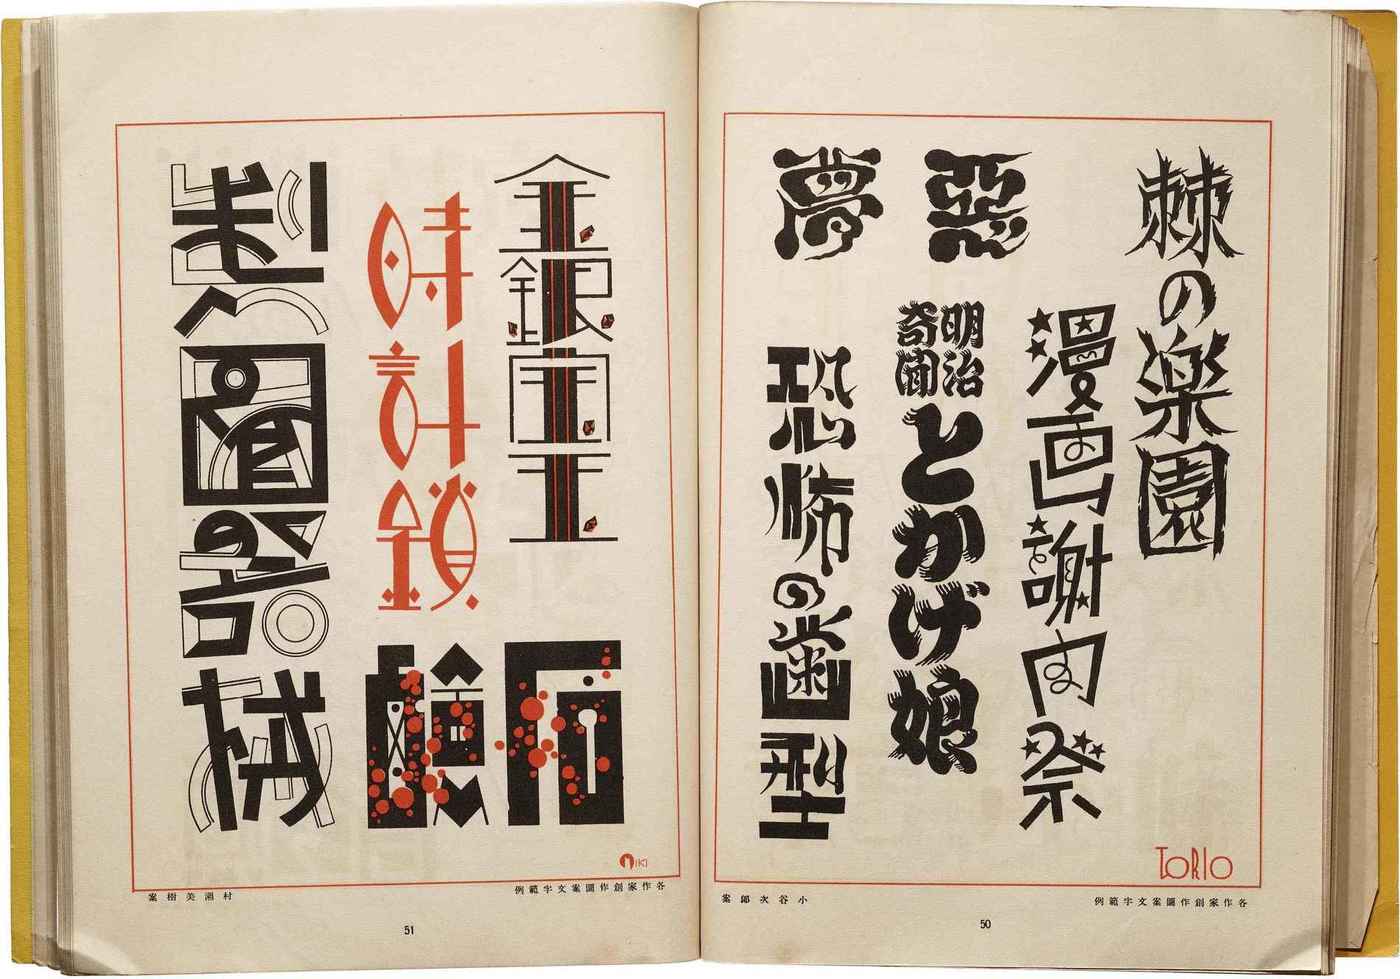 Rubricated ‘Edomoji’ (“calligraphic letterforms used for advertising”), pg51, volume 15, The Complete Commercial Artist, Hamada et al 1929